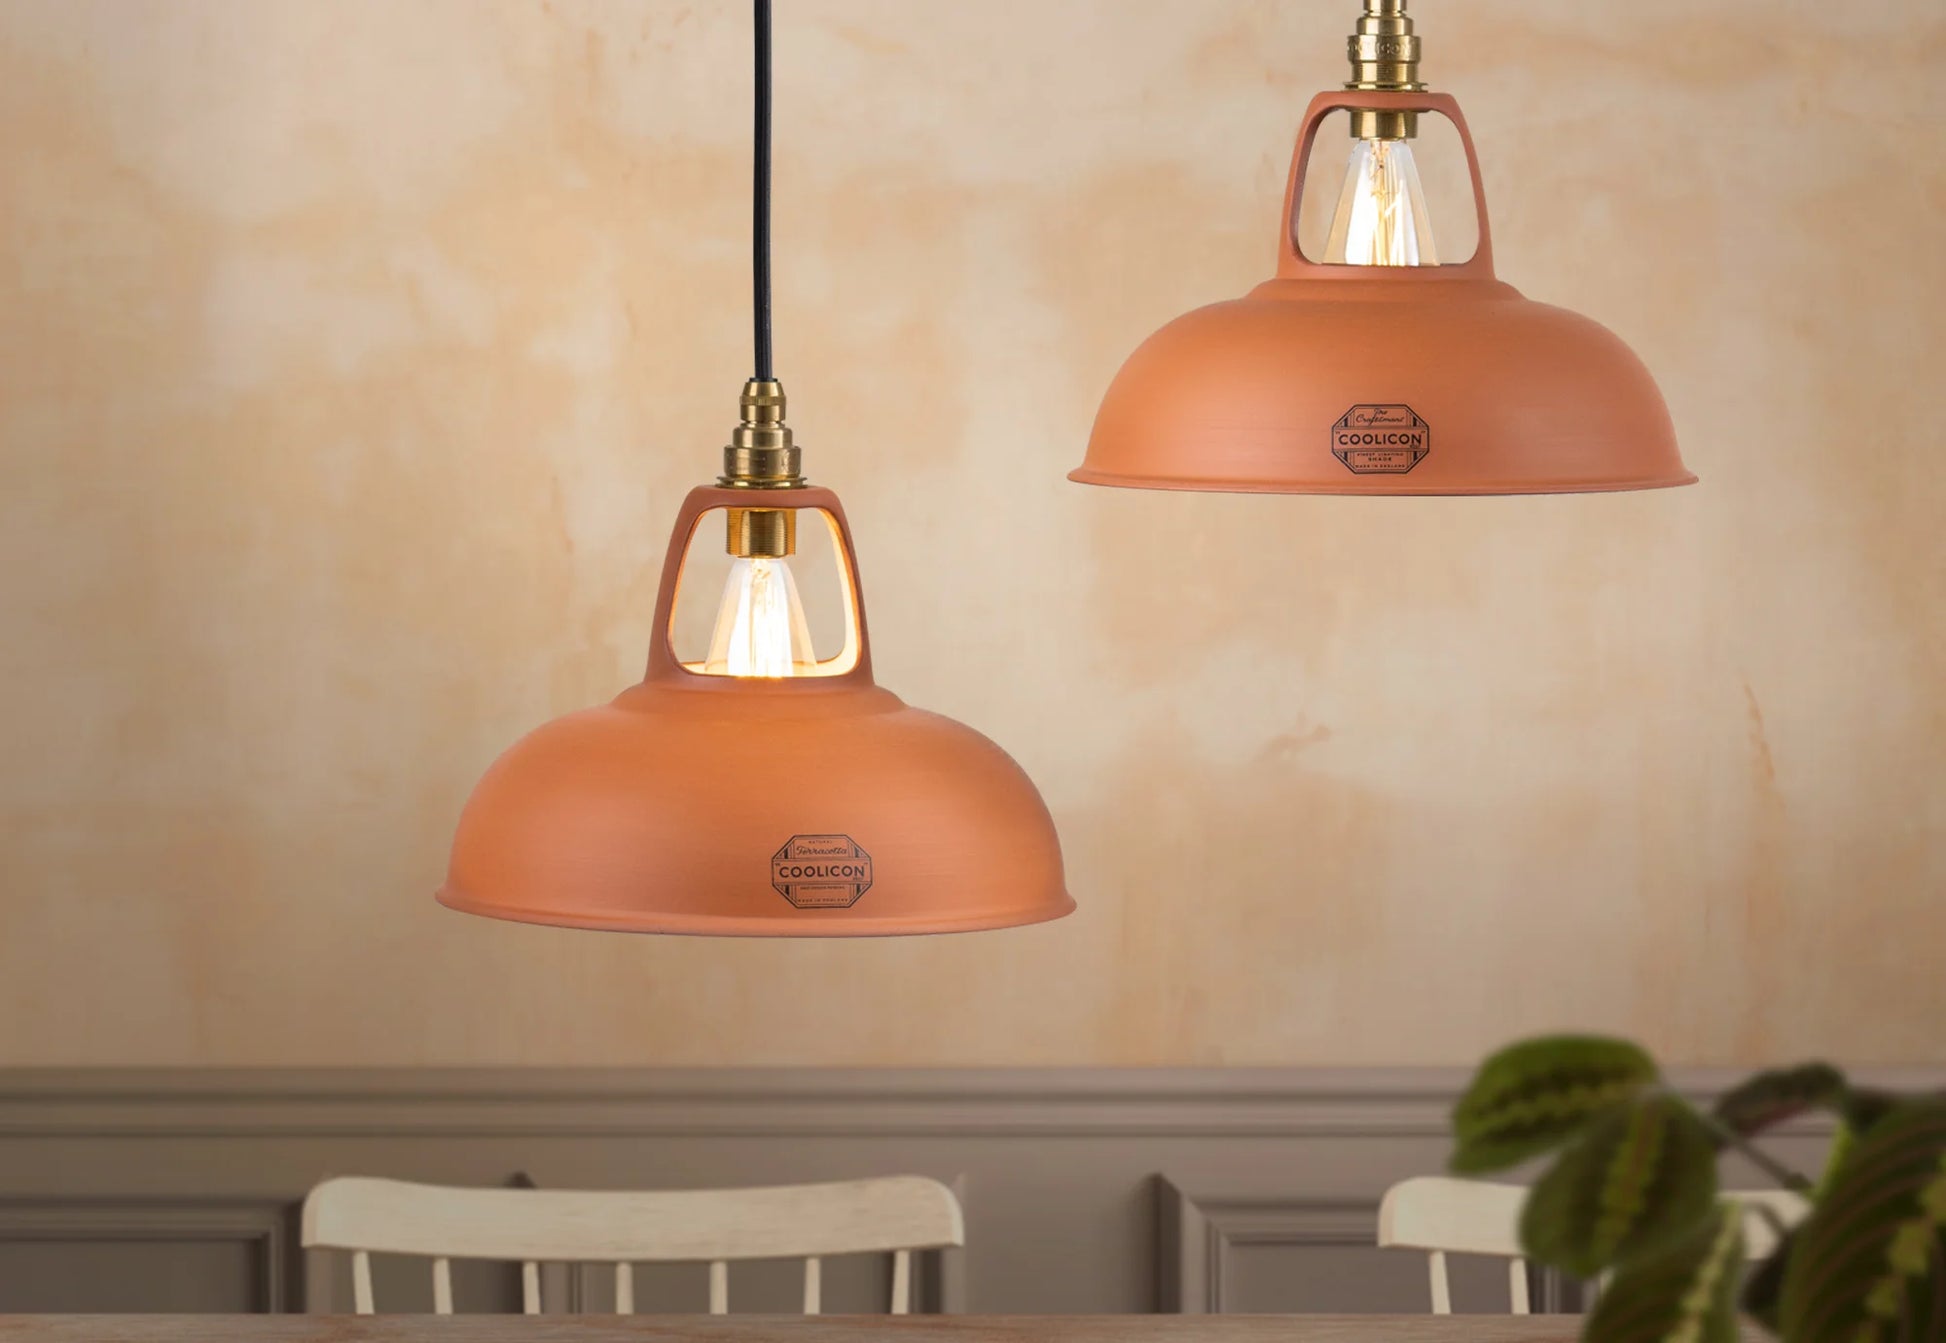 Two Natural Terracotta shades hanging above a table with a textured wall in the background